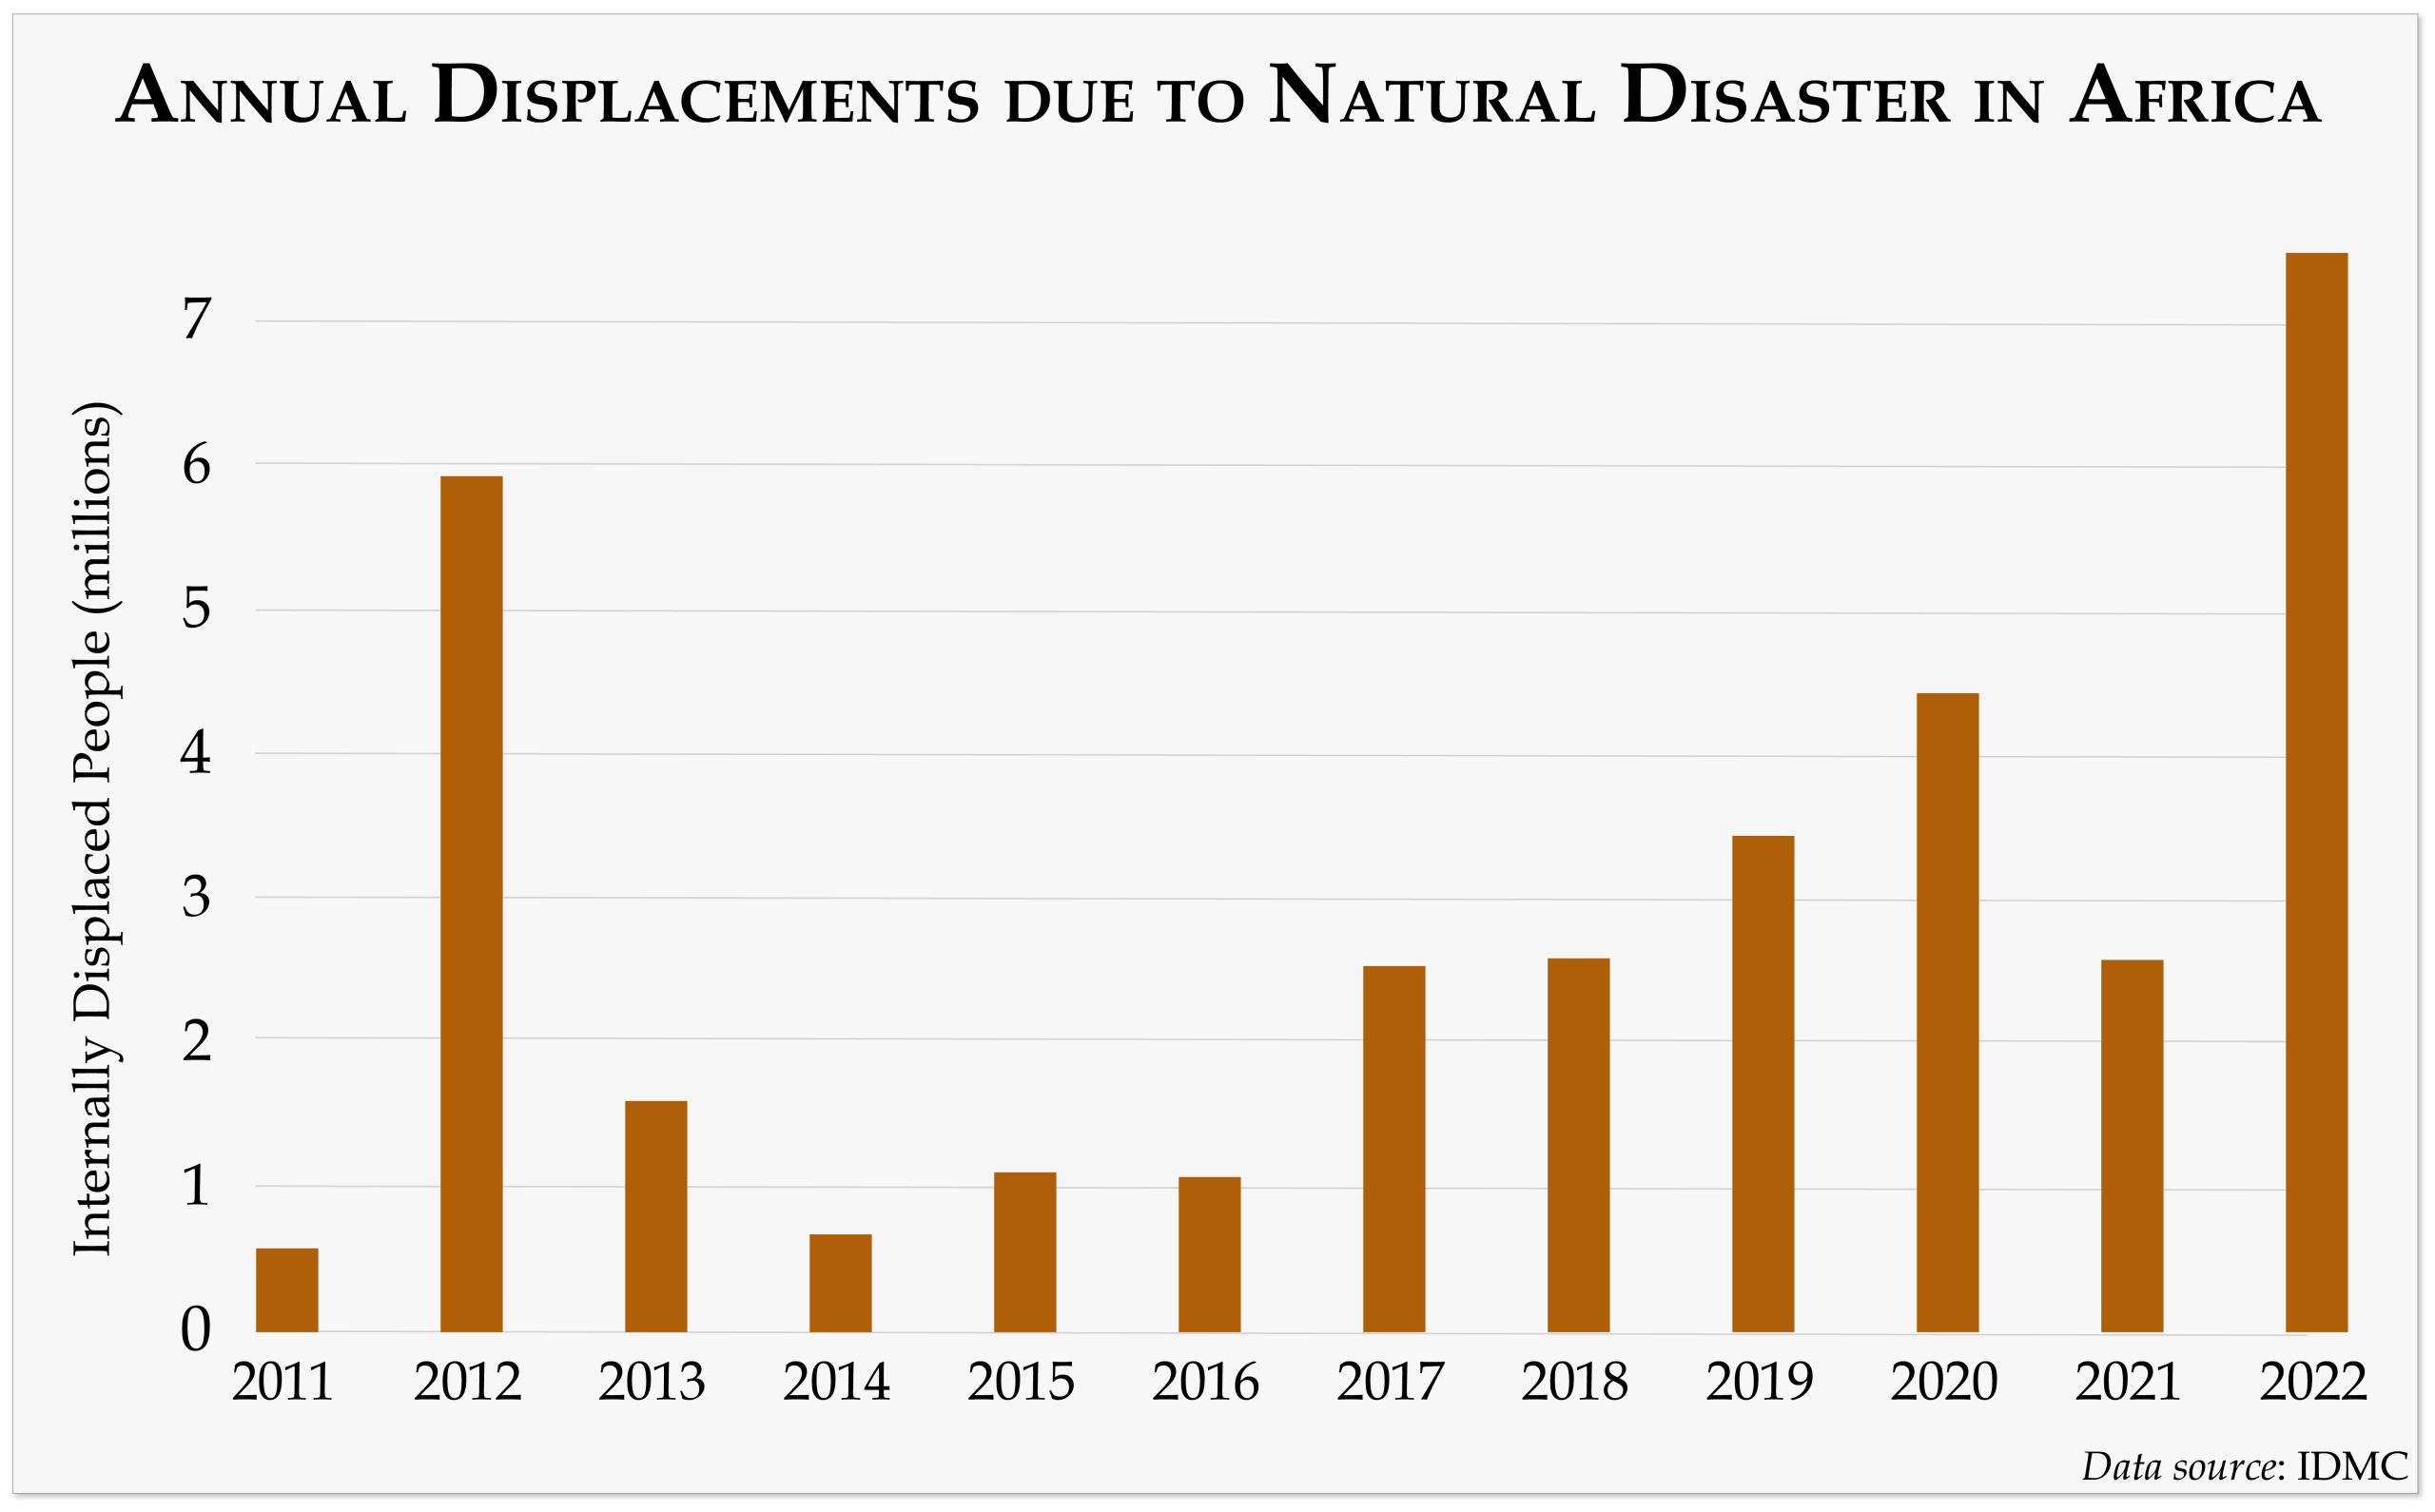 Annual Displacements due to National Disaster in Africa